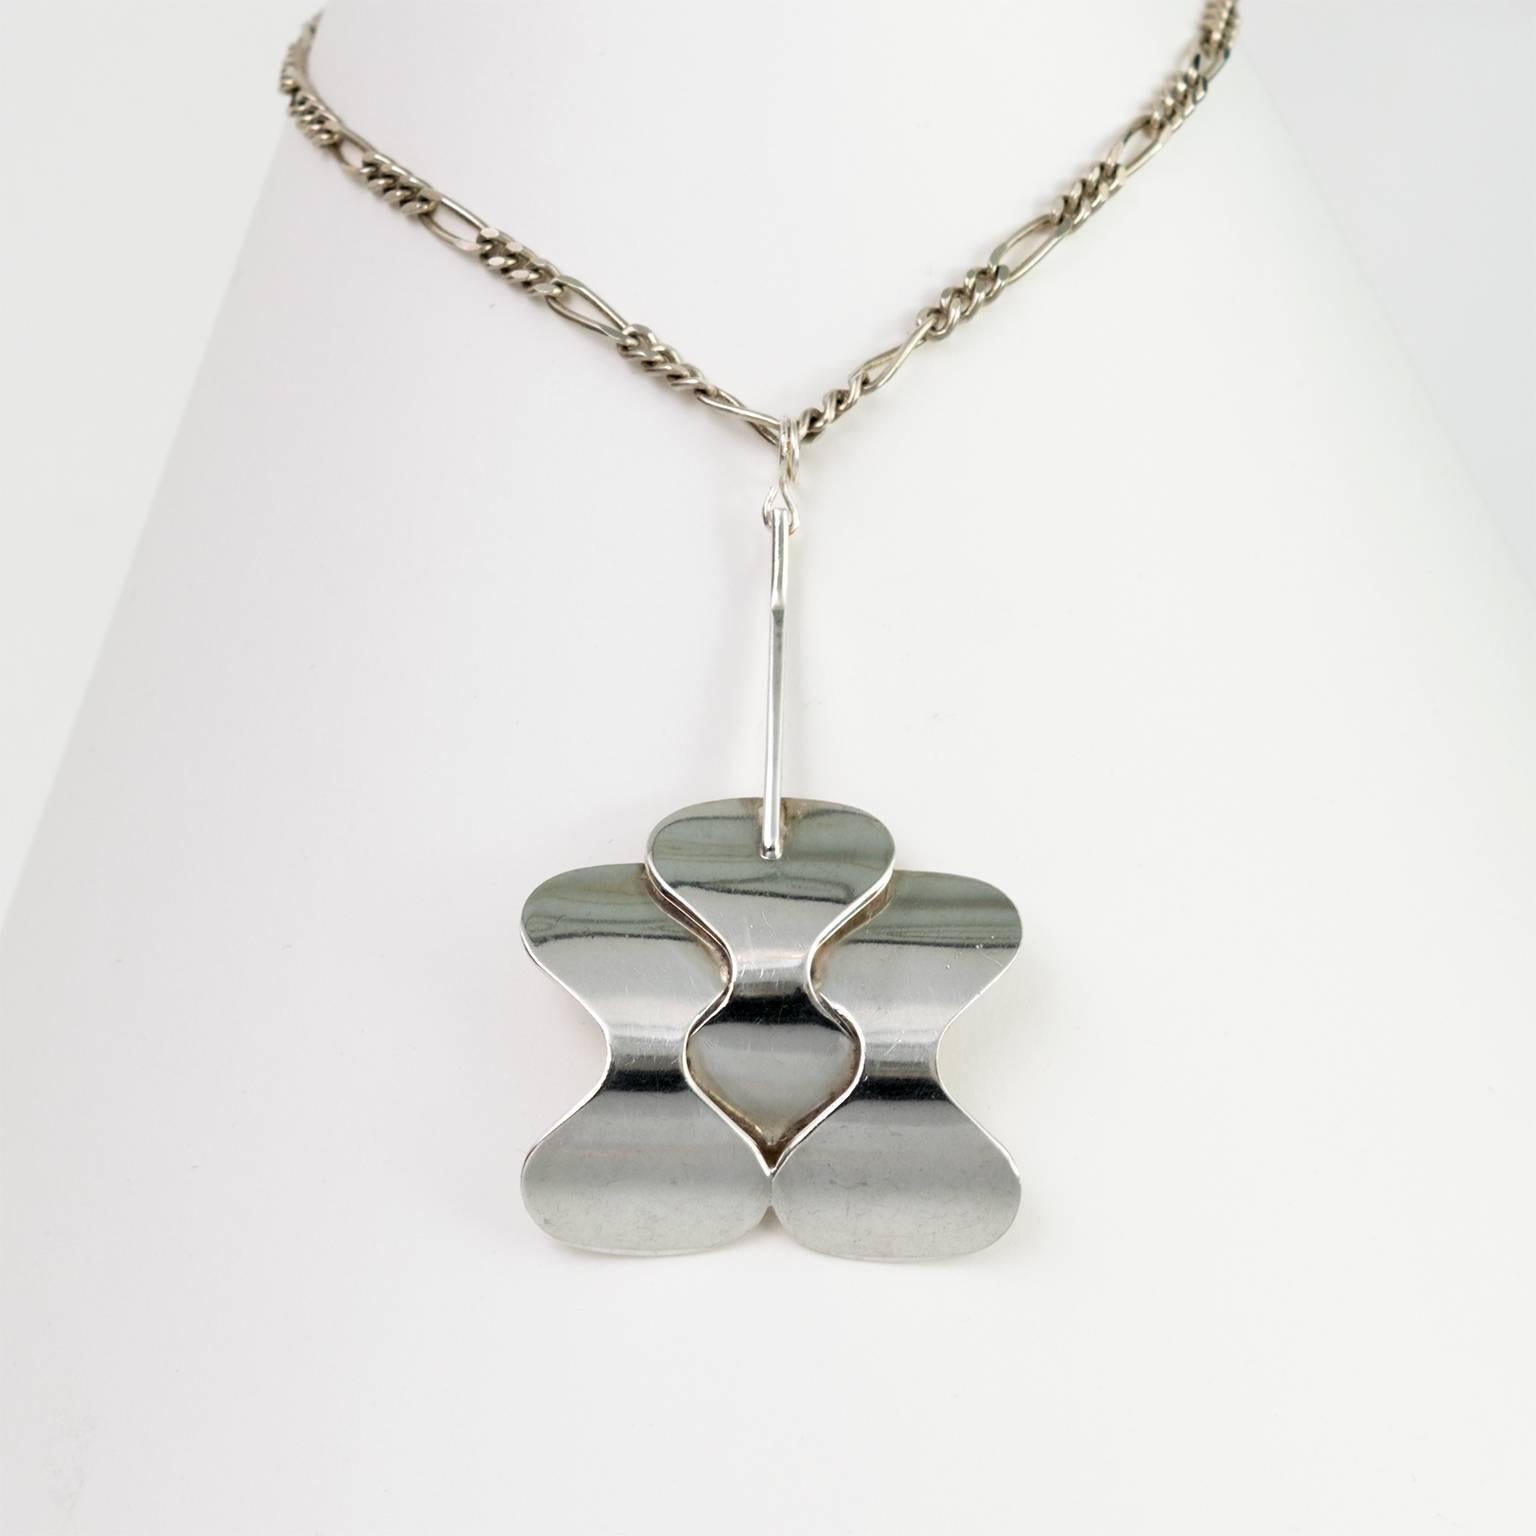 Silver pendant with 3 soft curves shapes and silver chain from Hopeajaloste OY., Helsinki, Finland
 
Chain length: 26